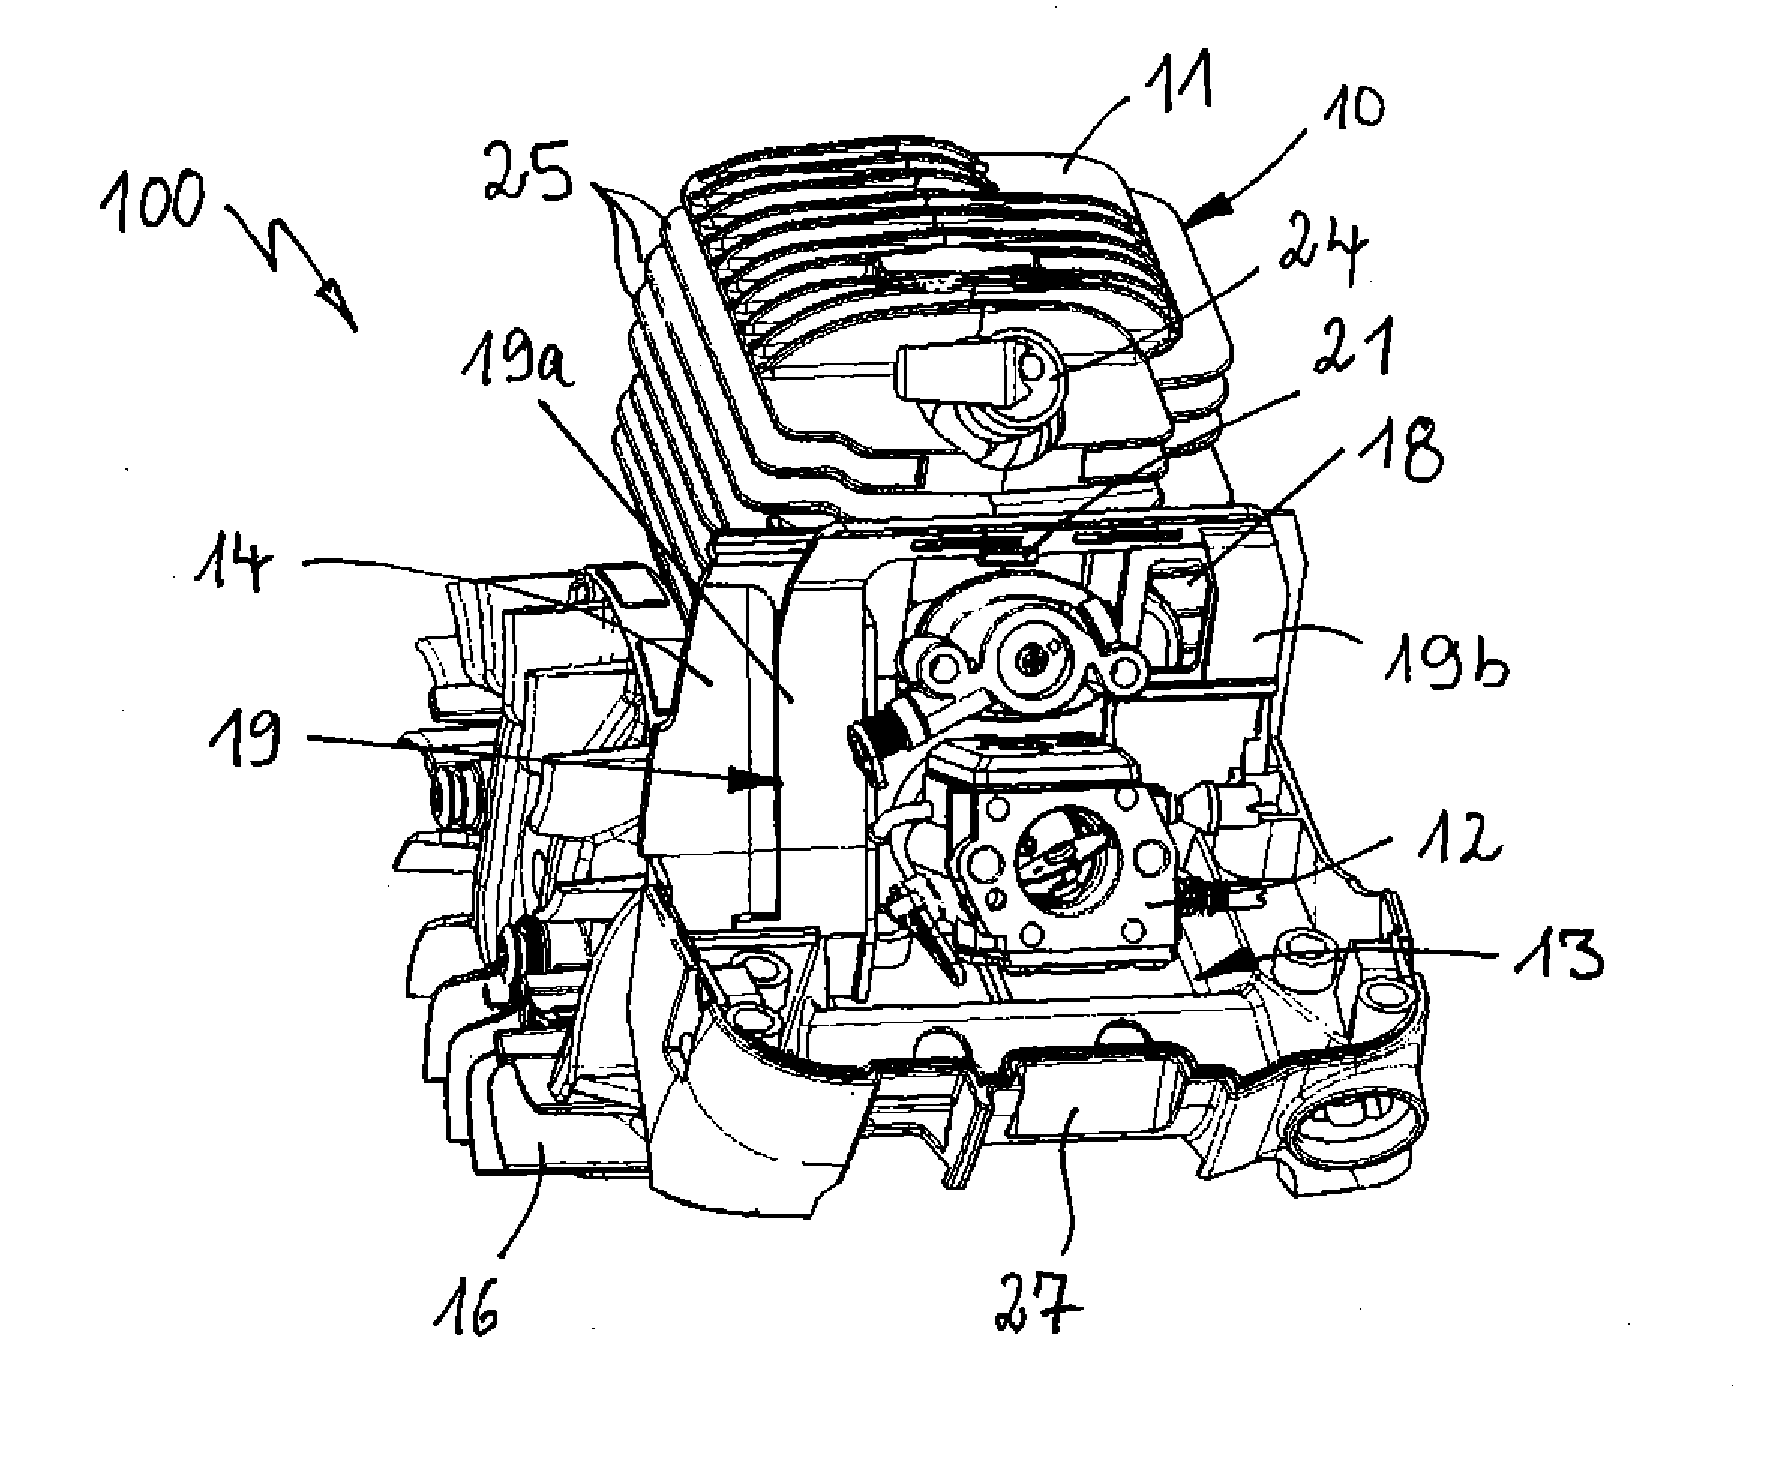 Motor-driven implement having switchable summer-winter operating function